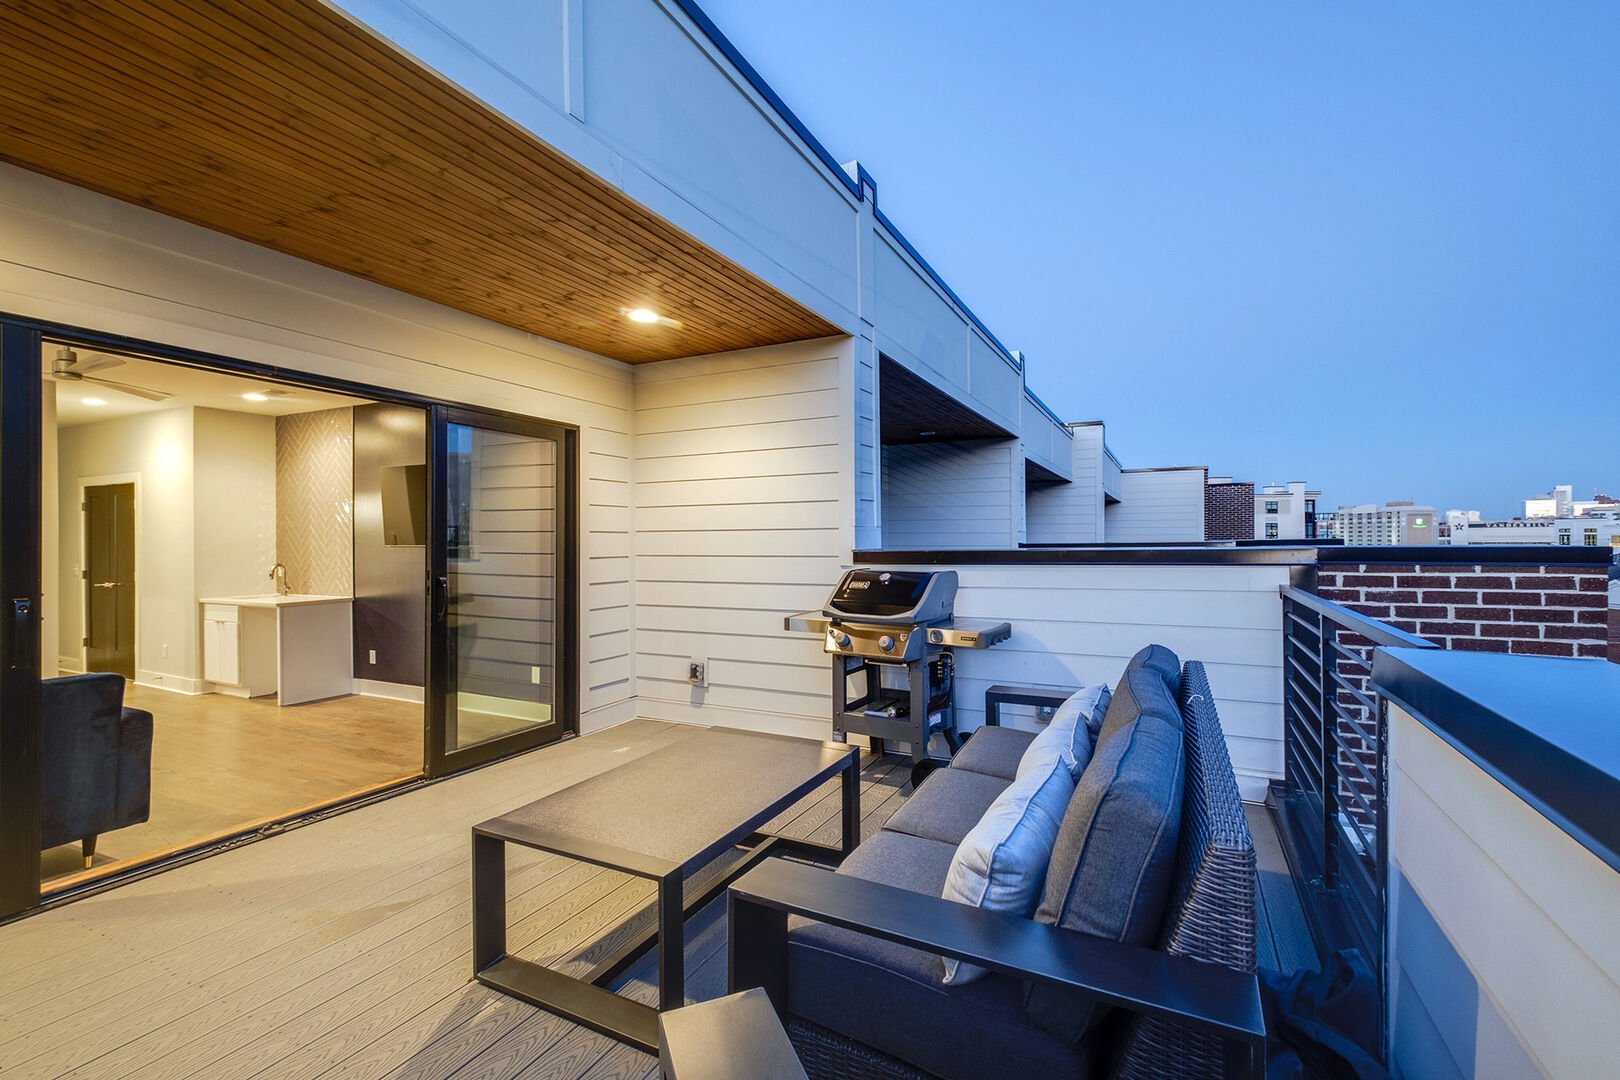 Private top floor deck with multiple seating and BBQ grill